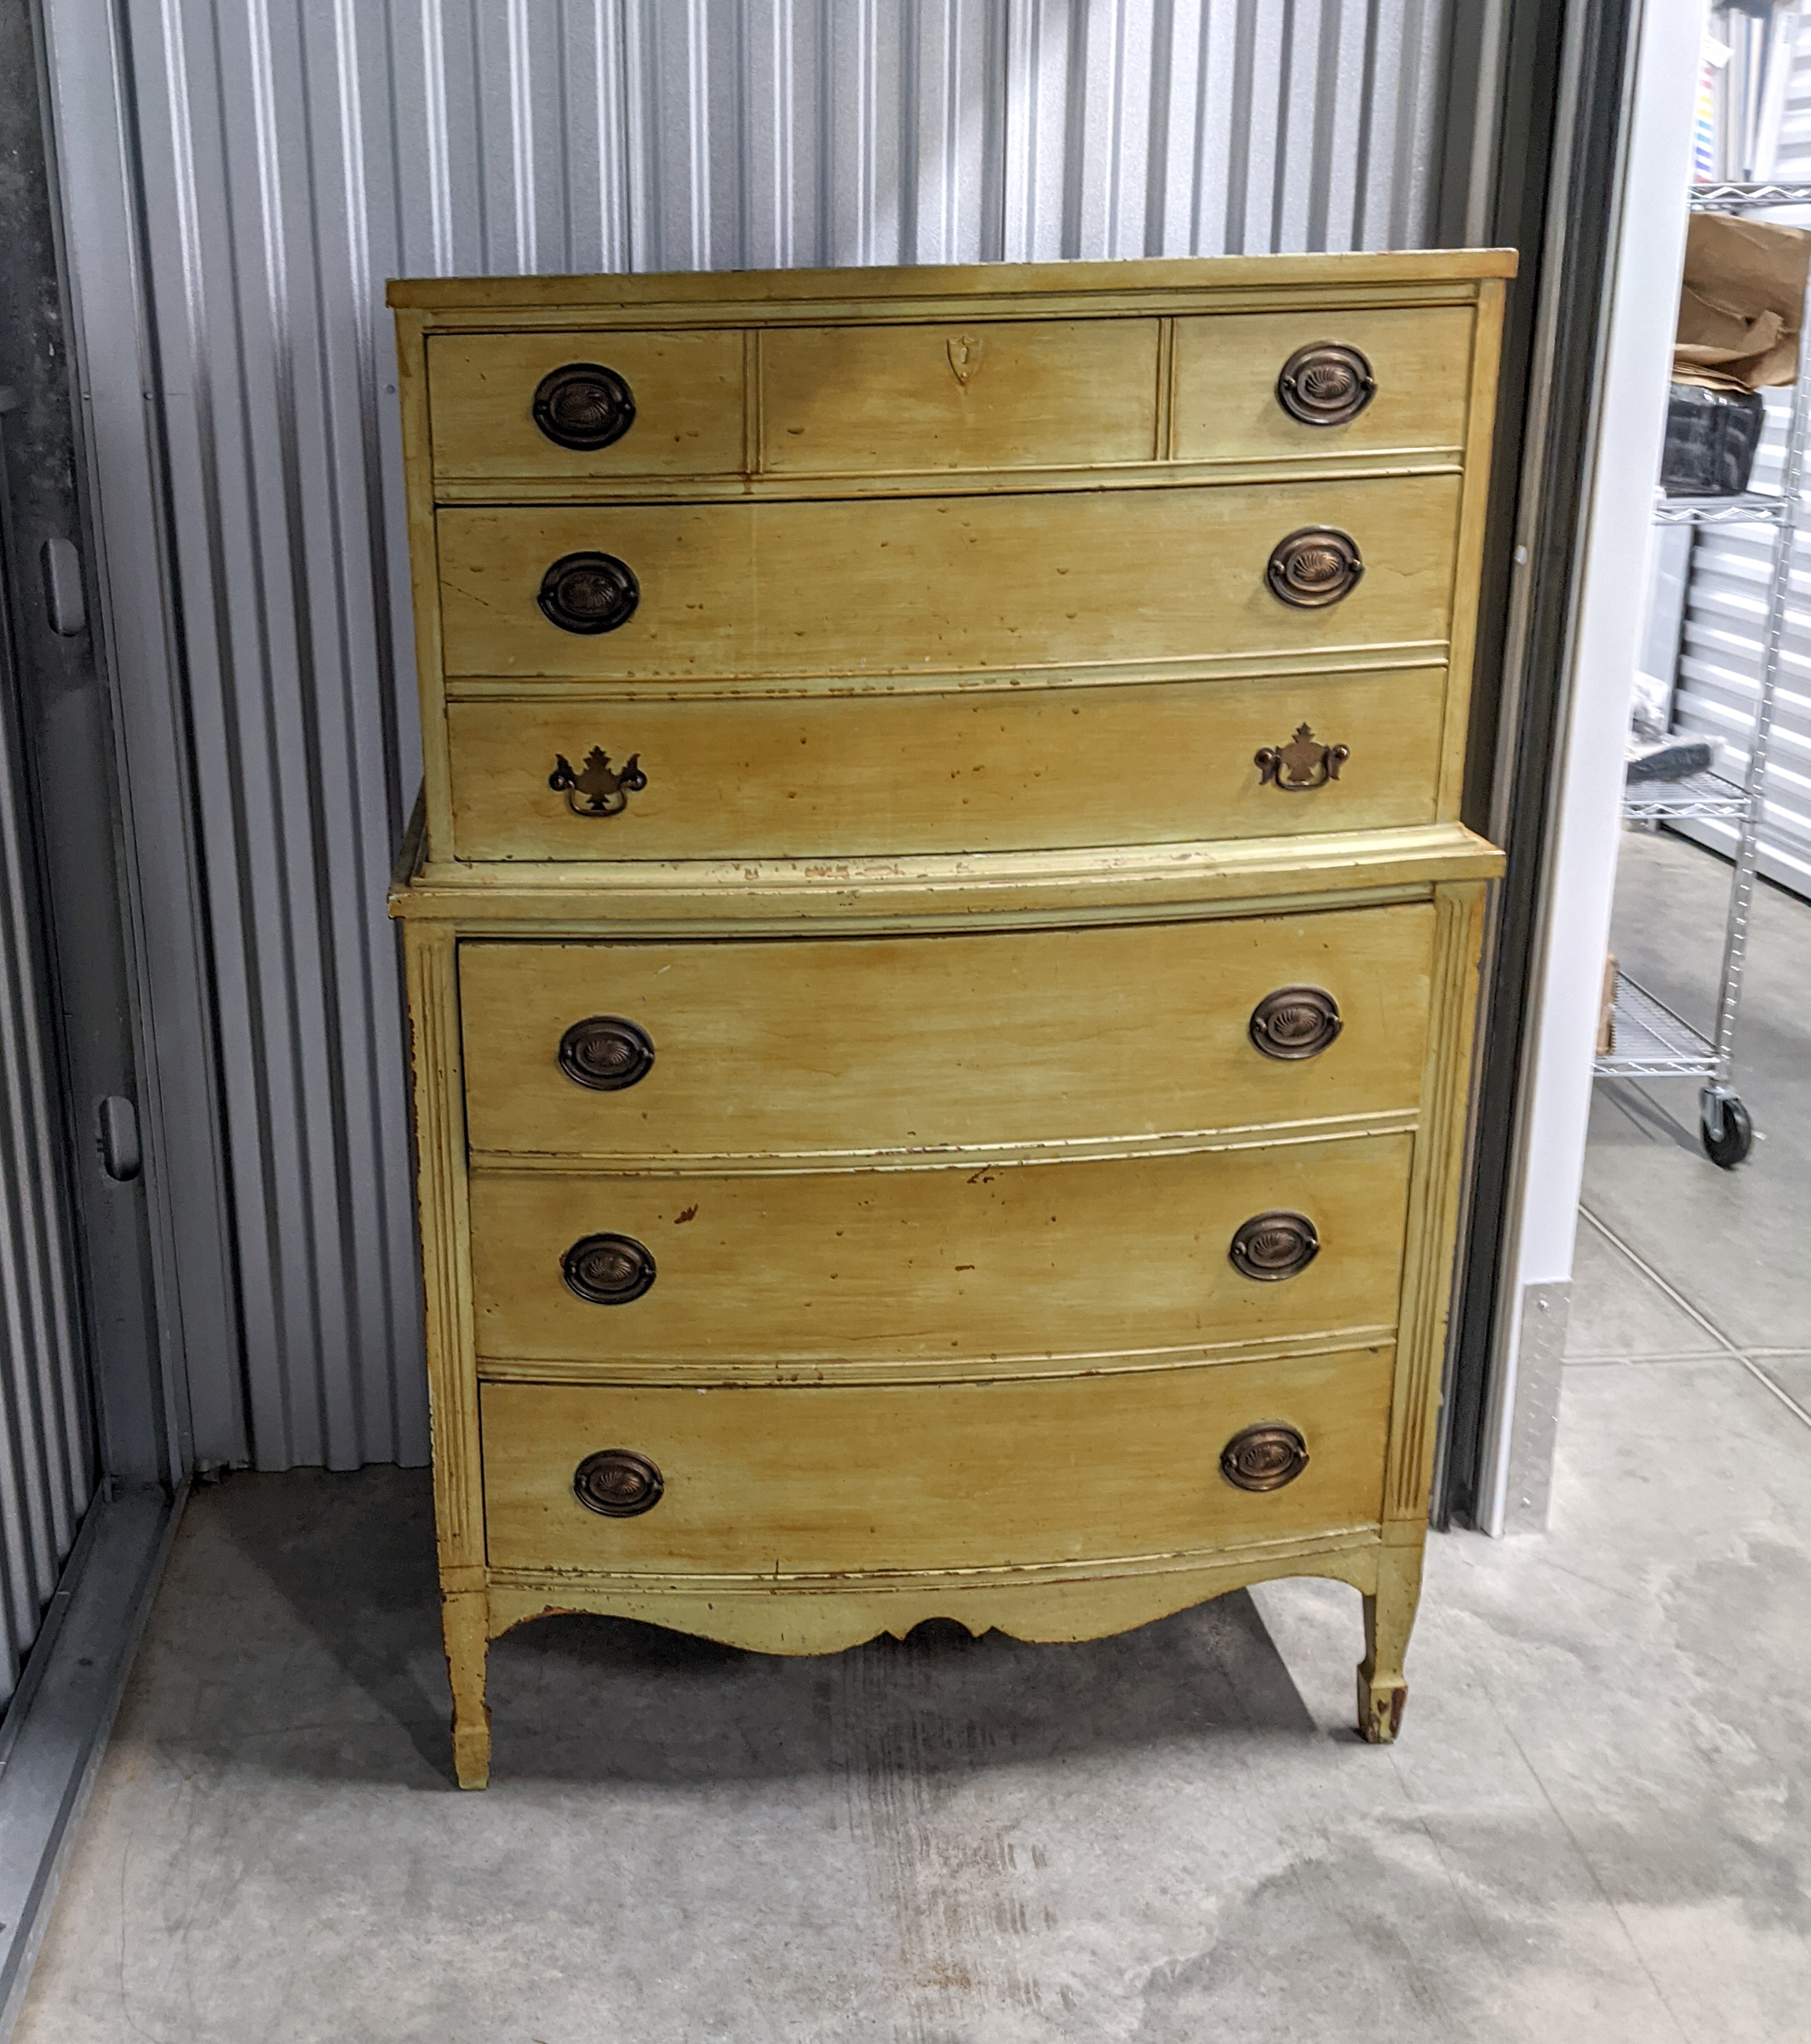 A yellow dresser in the storage unit.